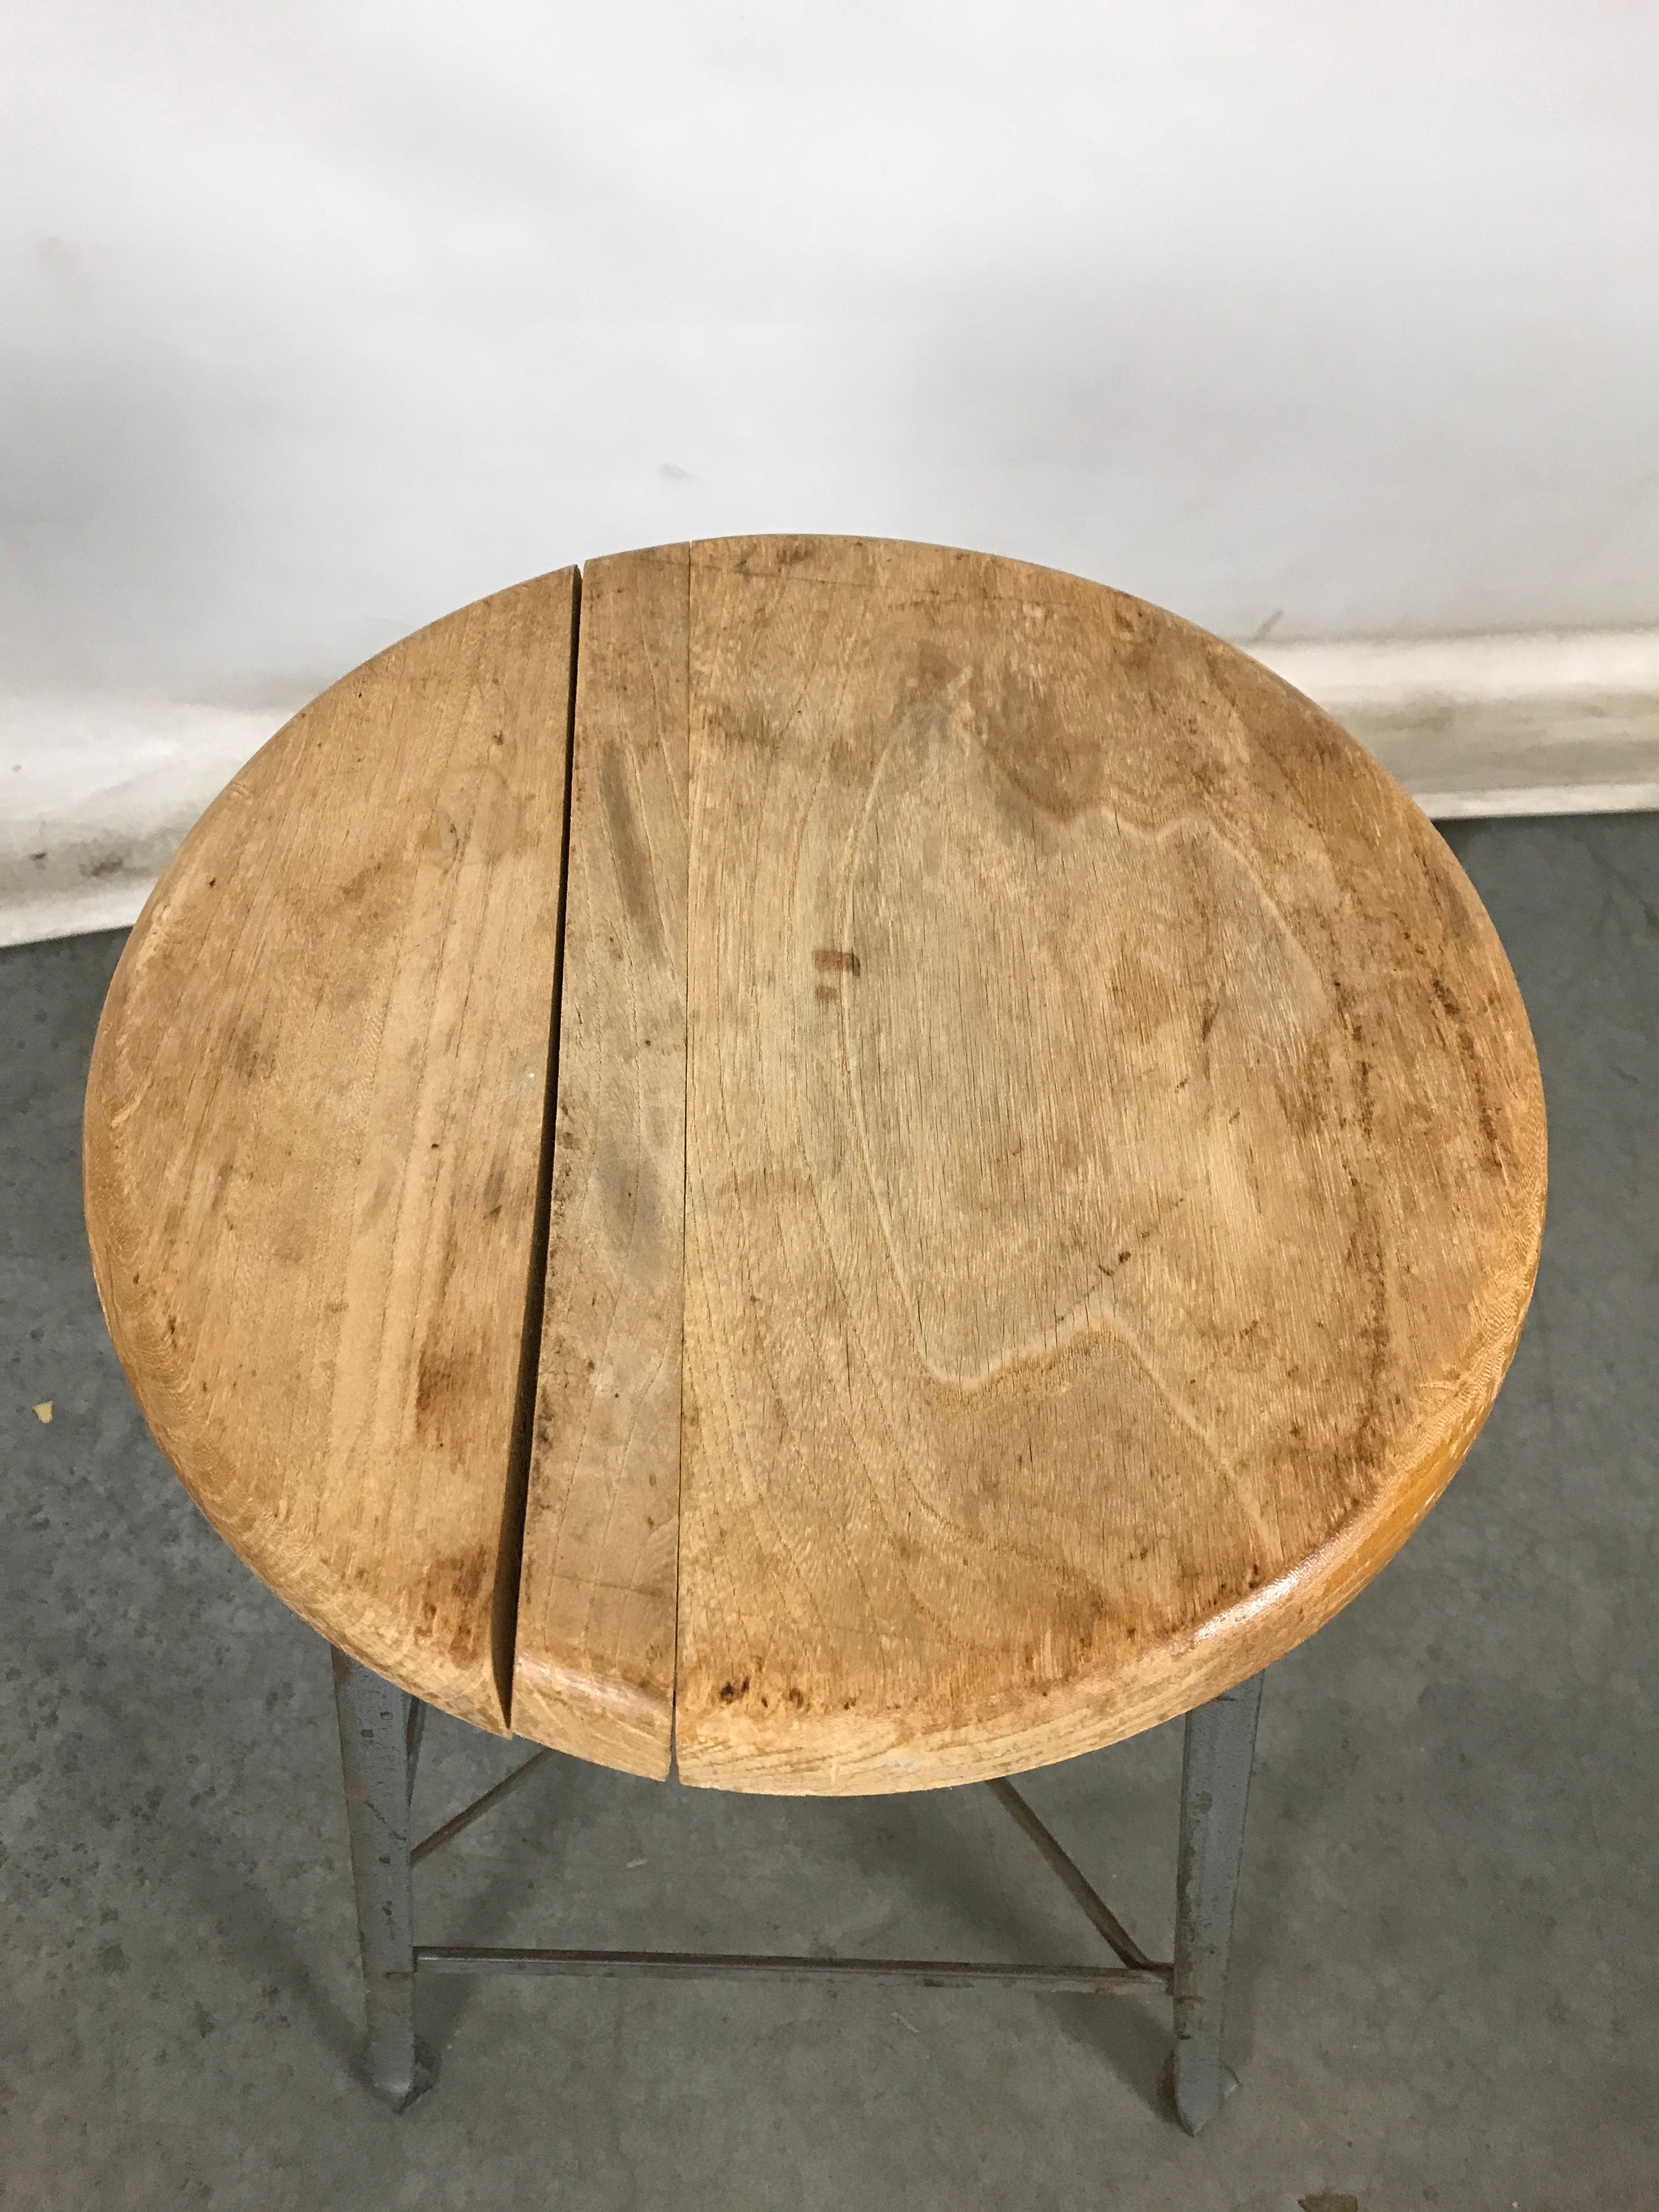 Cracked Wood Stool with Metal Base